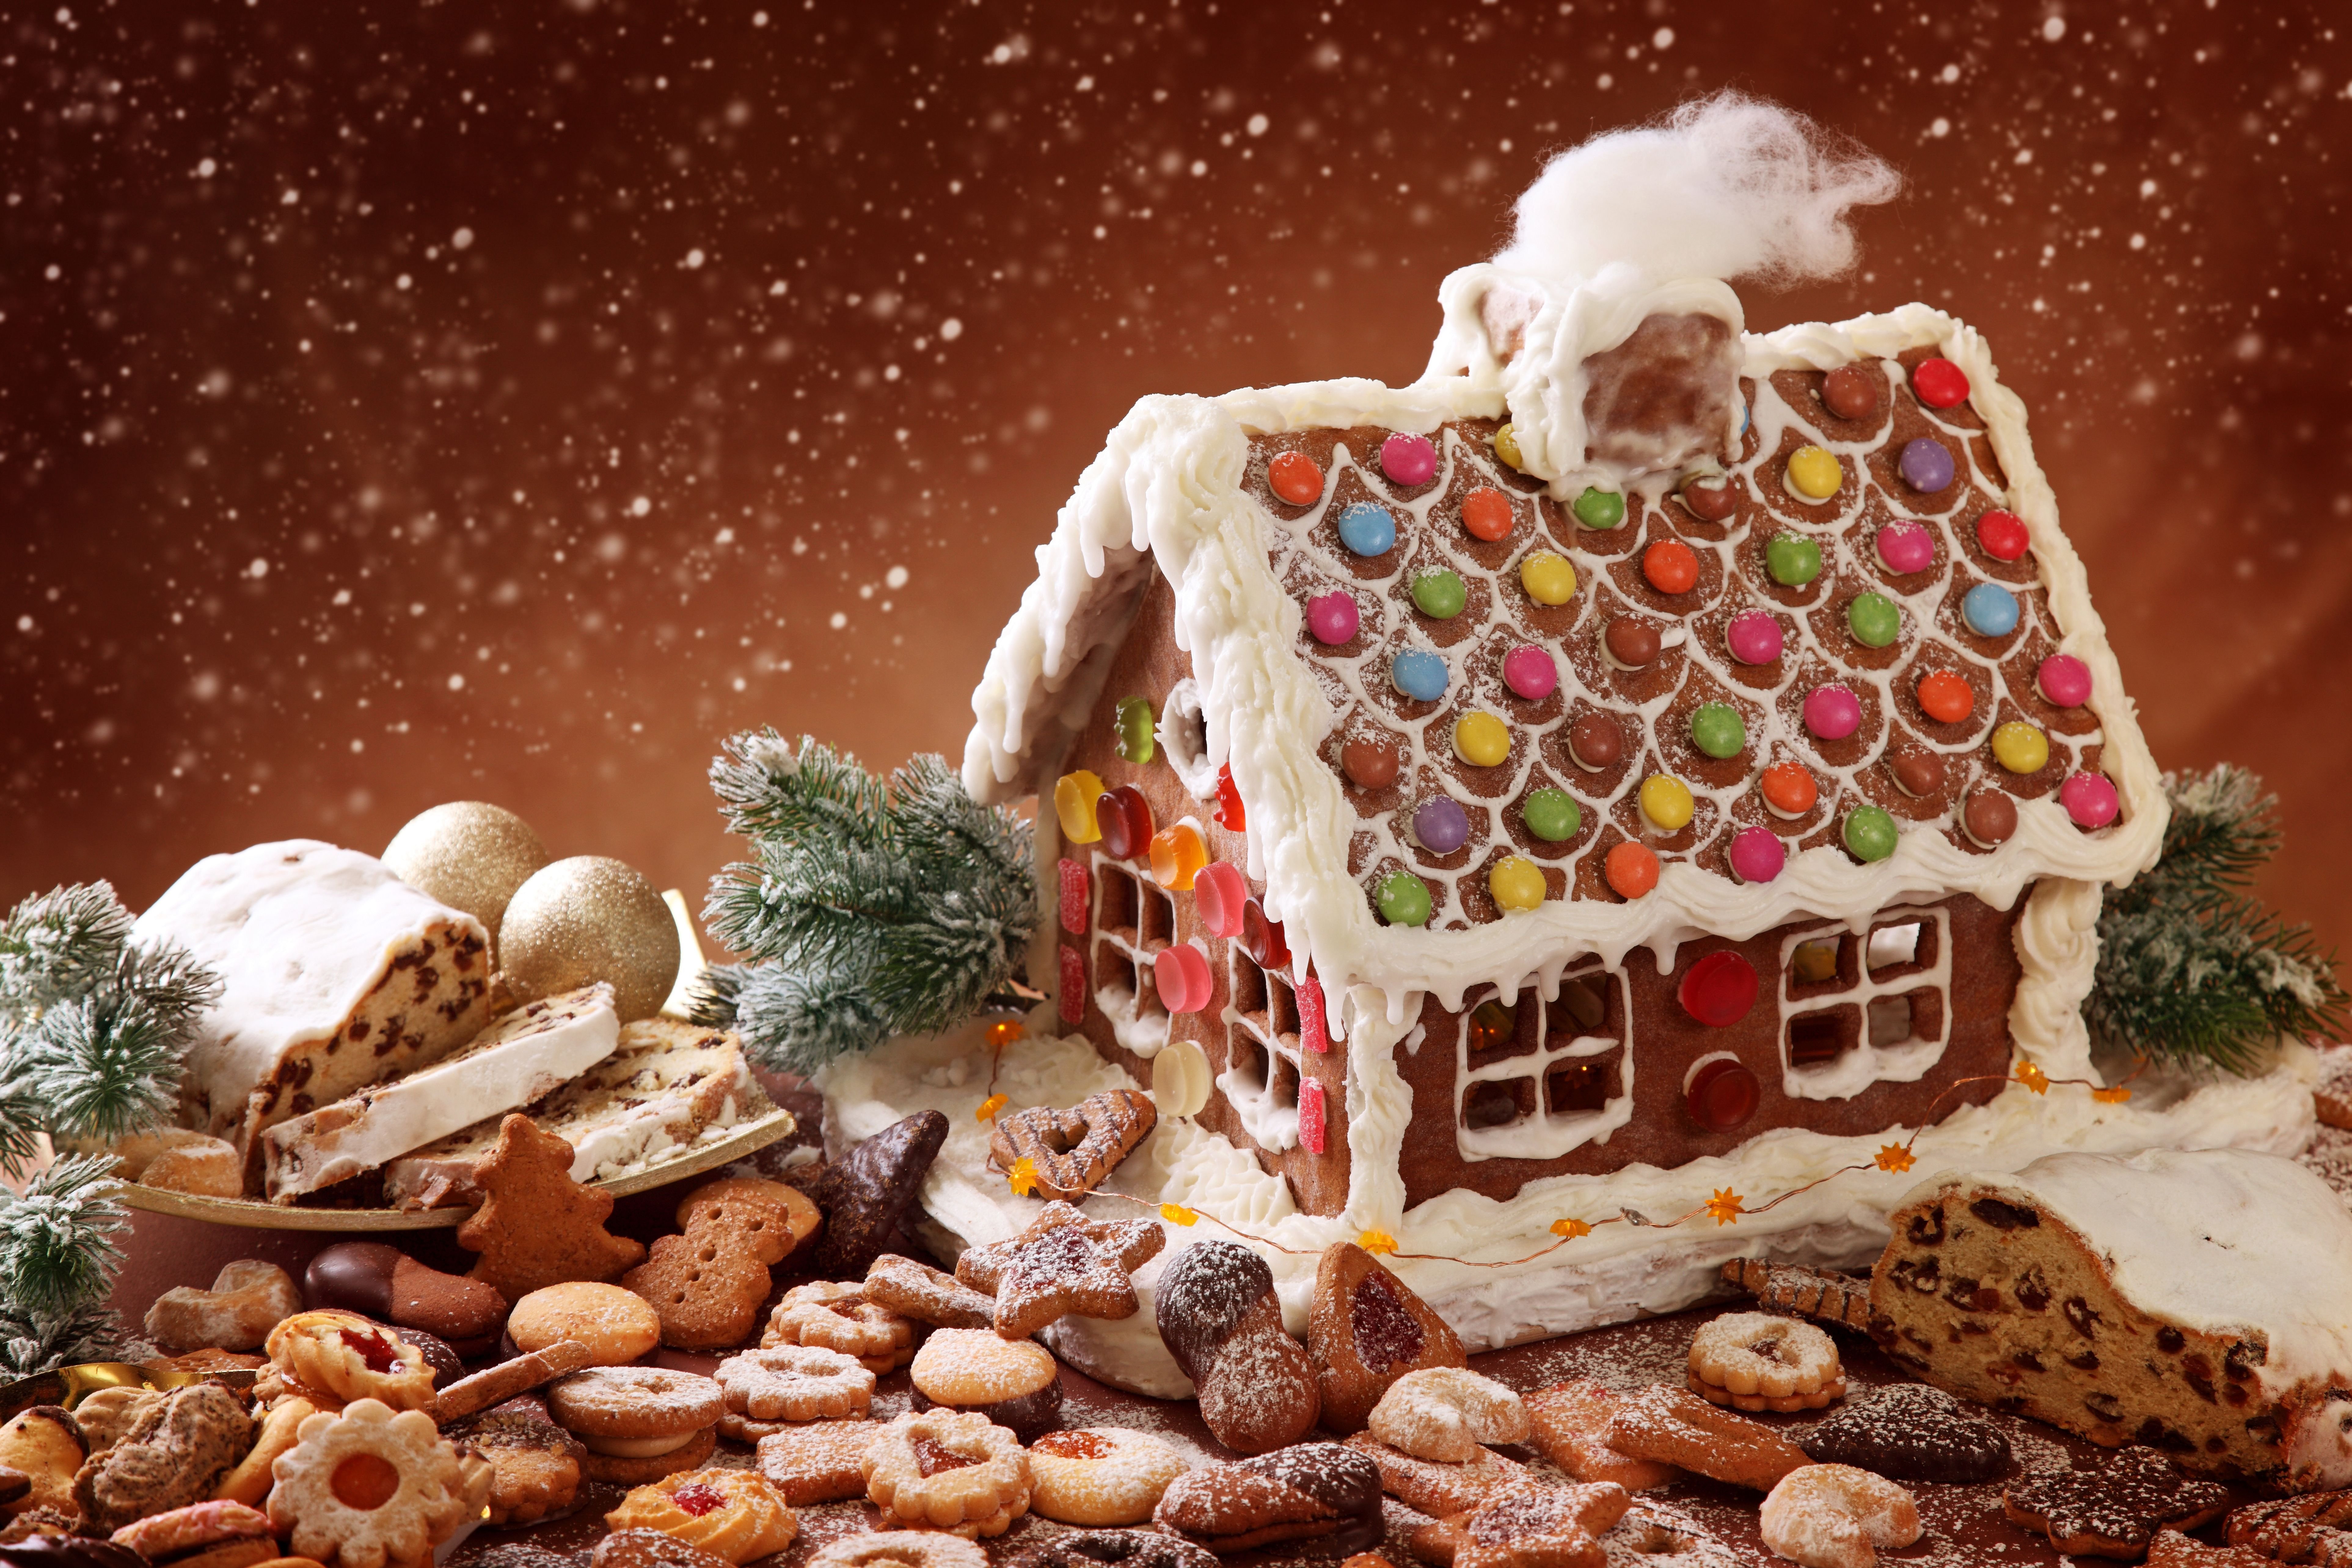 Winter Christmas Sweets Country Lodge Cookies Baking Gingerbread Sponge Cake Snowfall Powder Holiday Magic Wallpapers Hd Desktop And Mobile Backgrounds